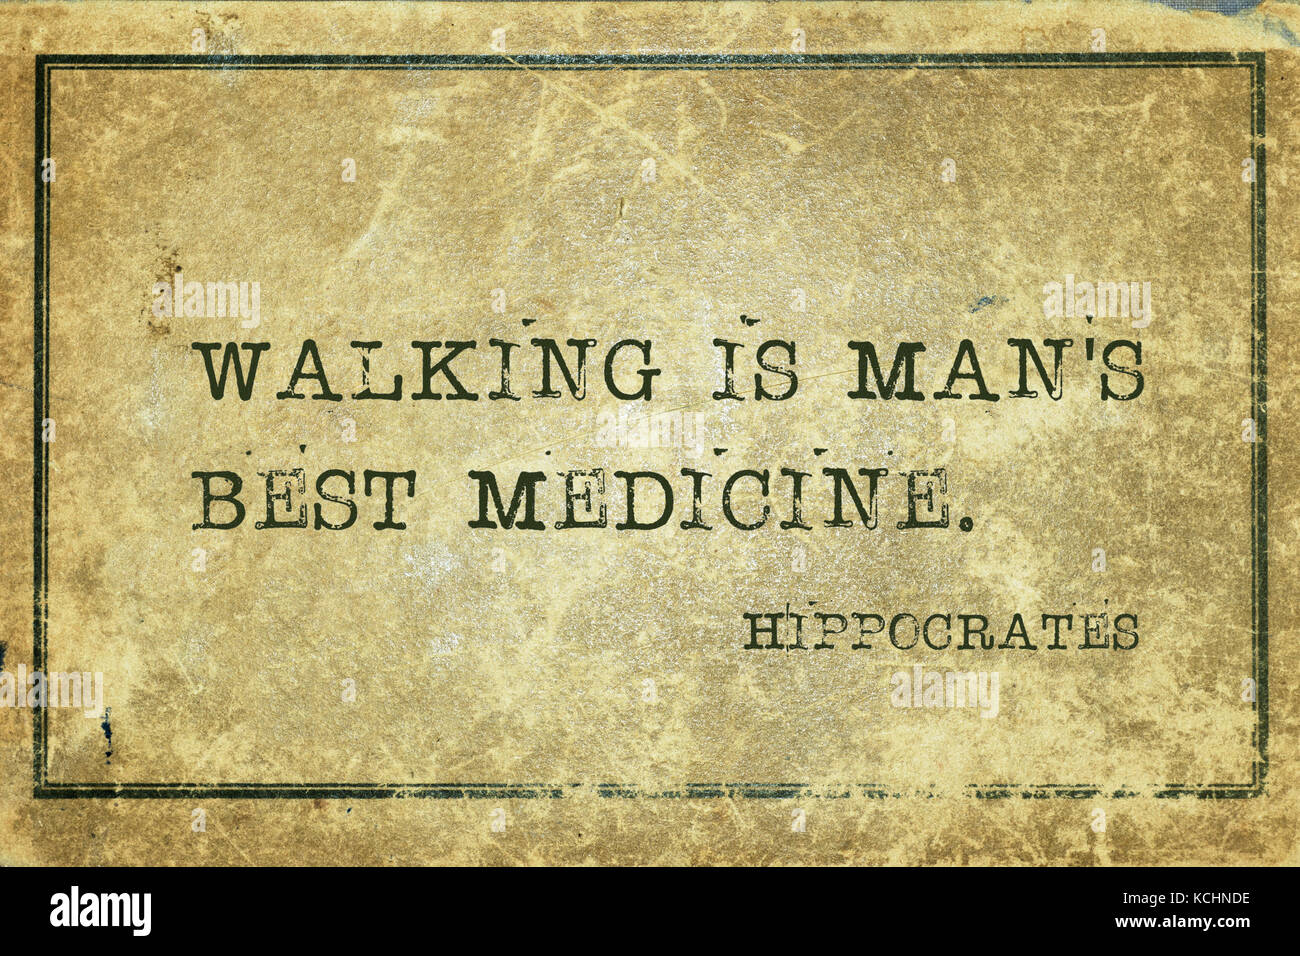 Walking is man's best medicine - famous ancient Greek physician Hippocrates quote printed on grunge vintage cardboard Stock Photo